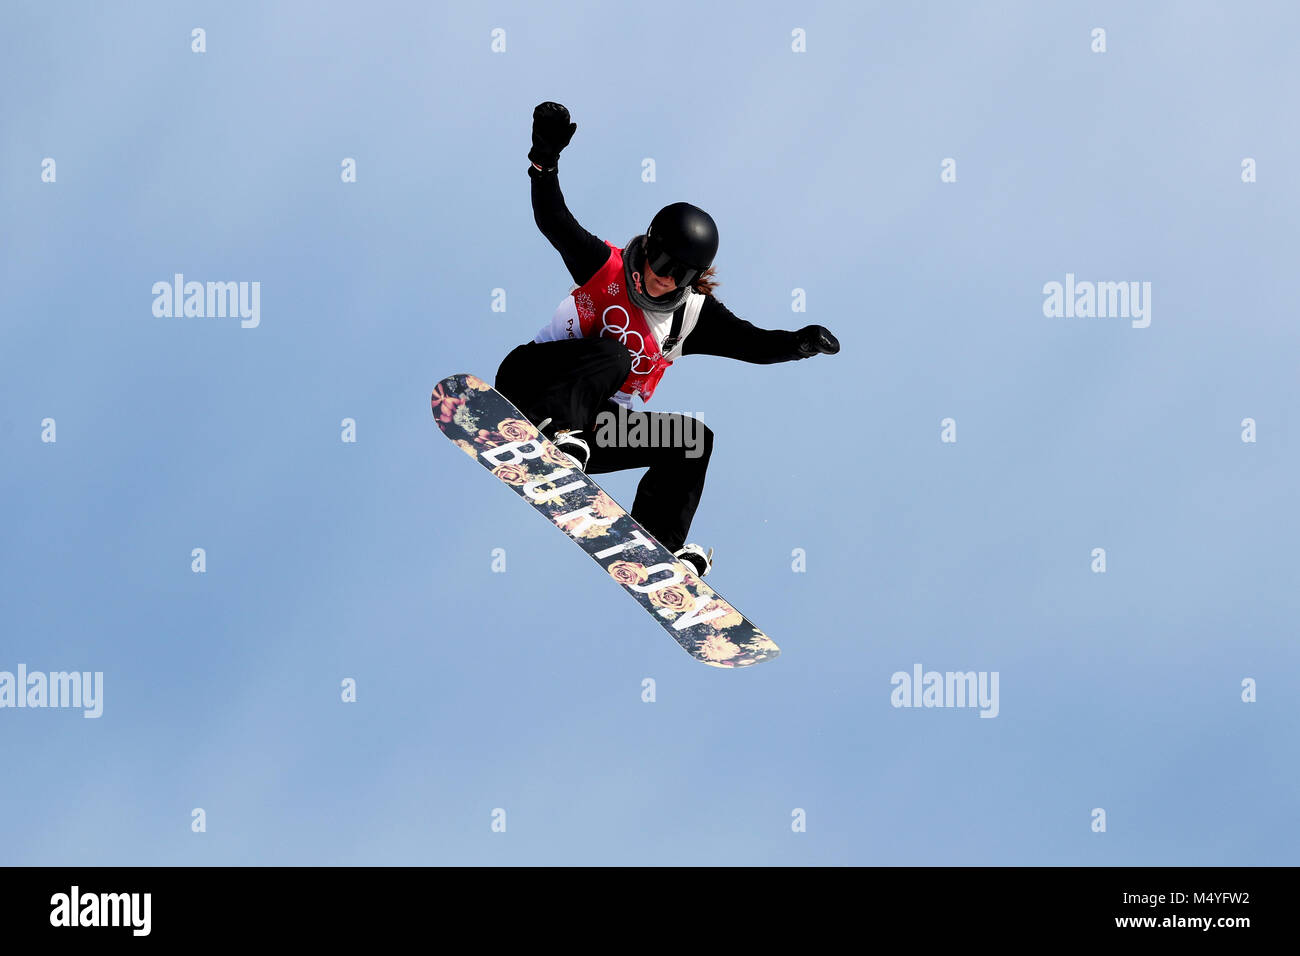 Switzerland's Sina Candrian in the Ladies Snowboarding Big Air at the Alpensia Ski Jumping Centre during day ten of the PyeongChang 2018 Winter Olympic Games in South Korea. Stock Photo